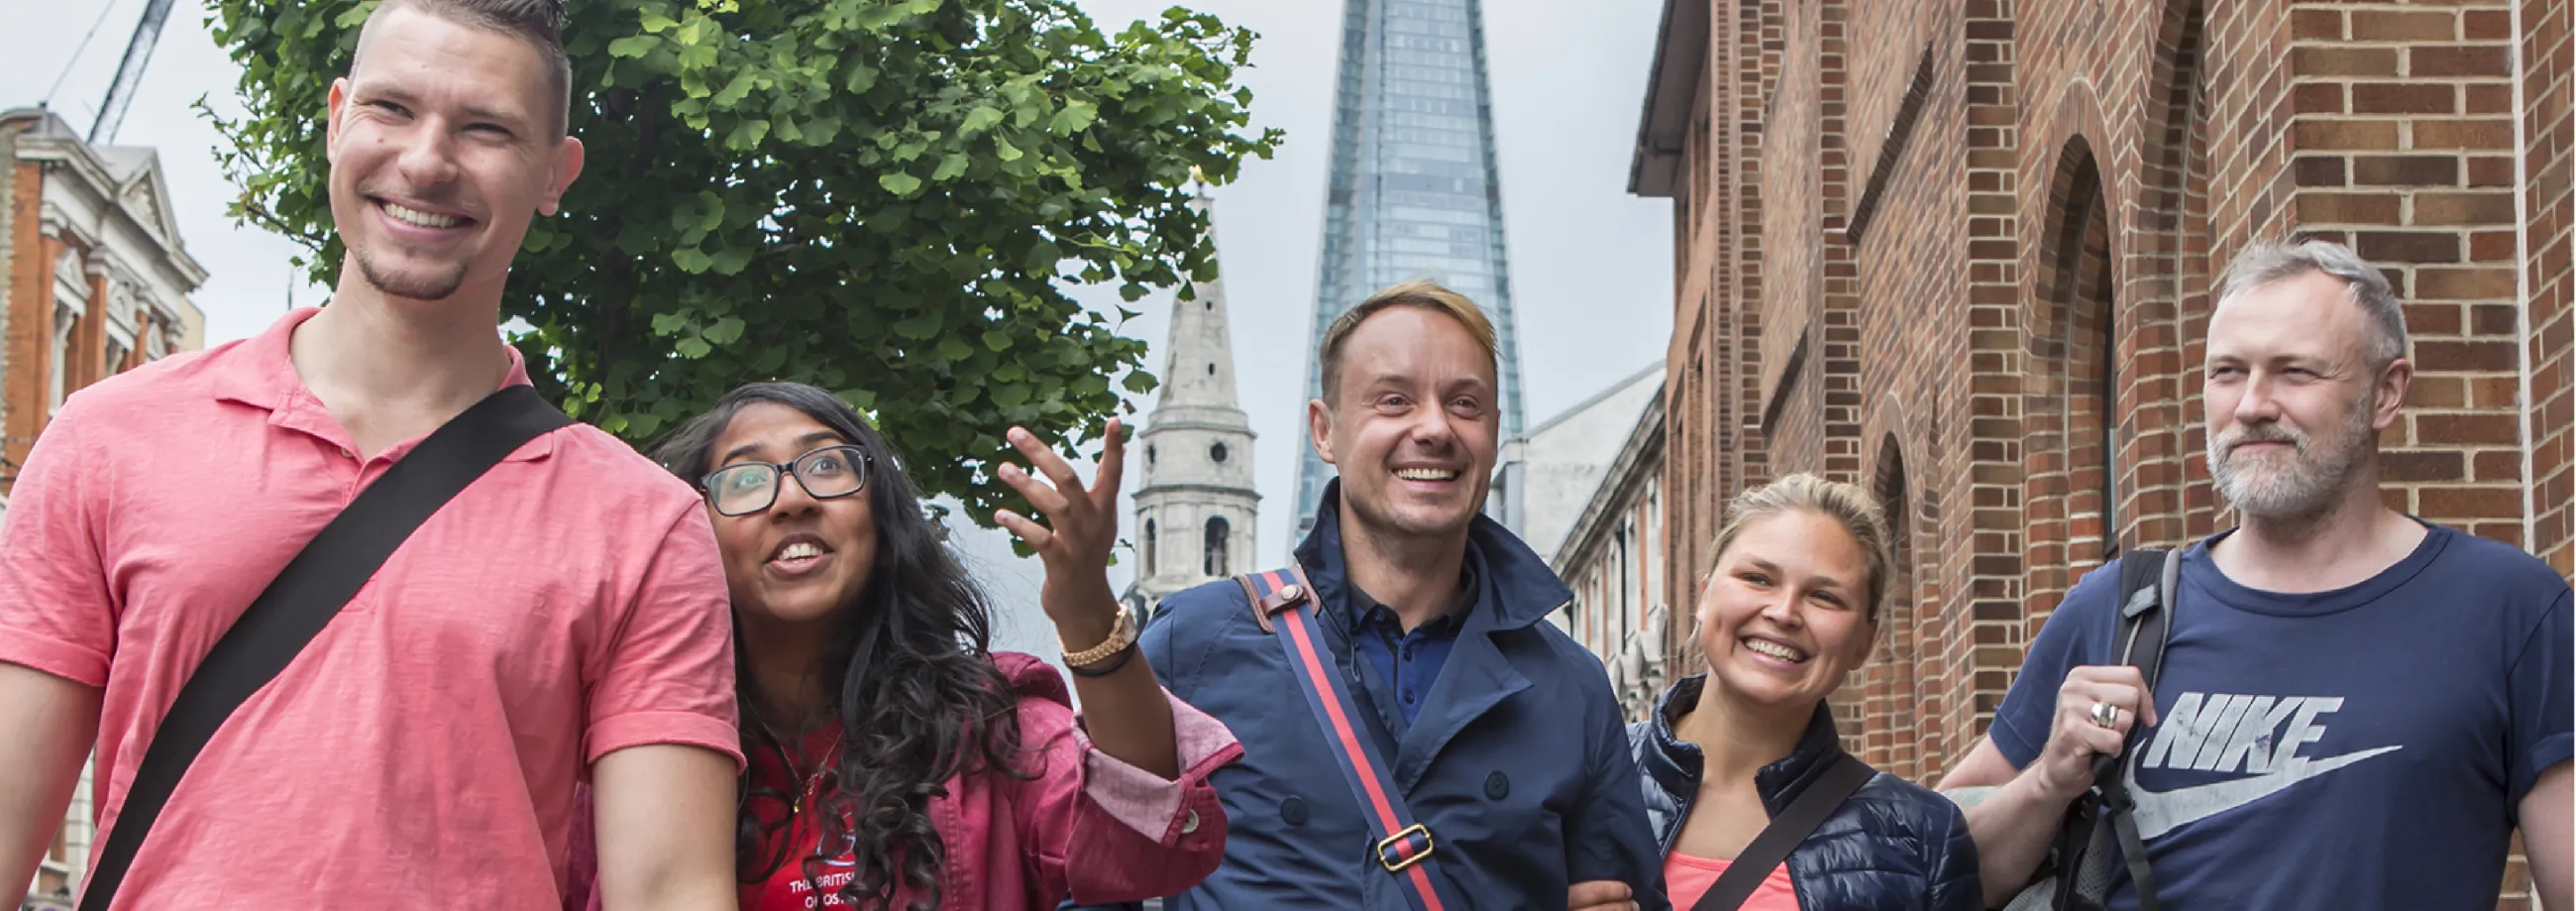 Osteopathy students walking along the street in London, with The Shard building visible behind them